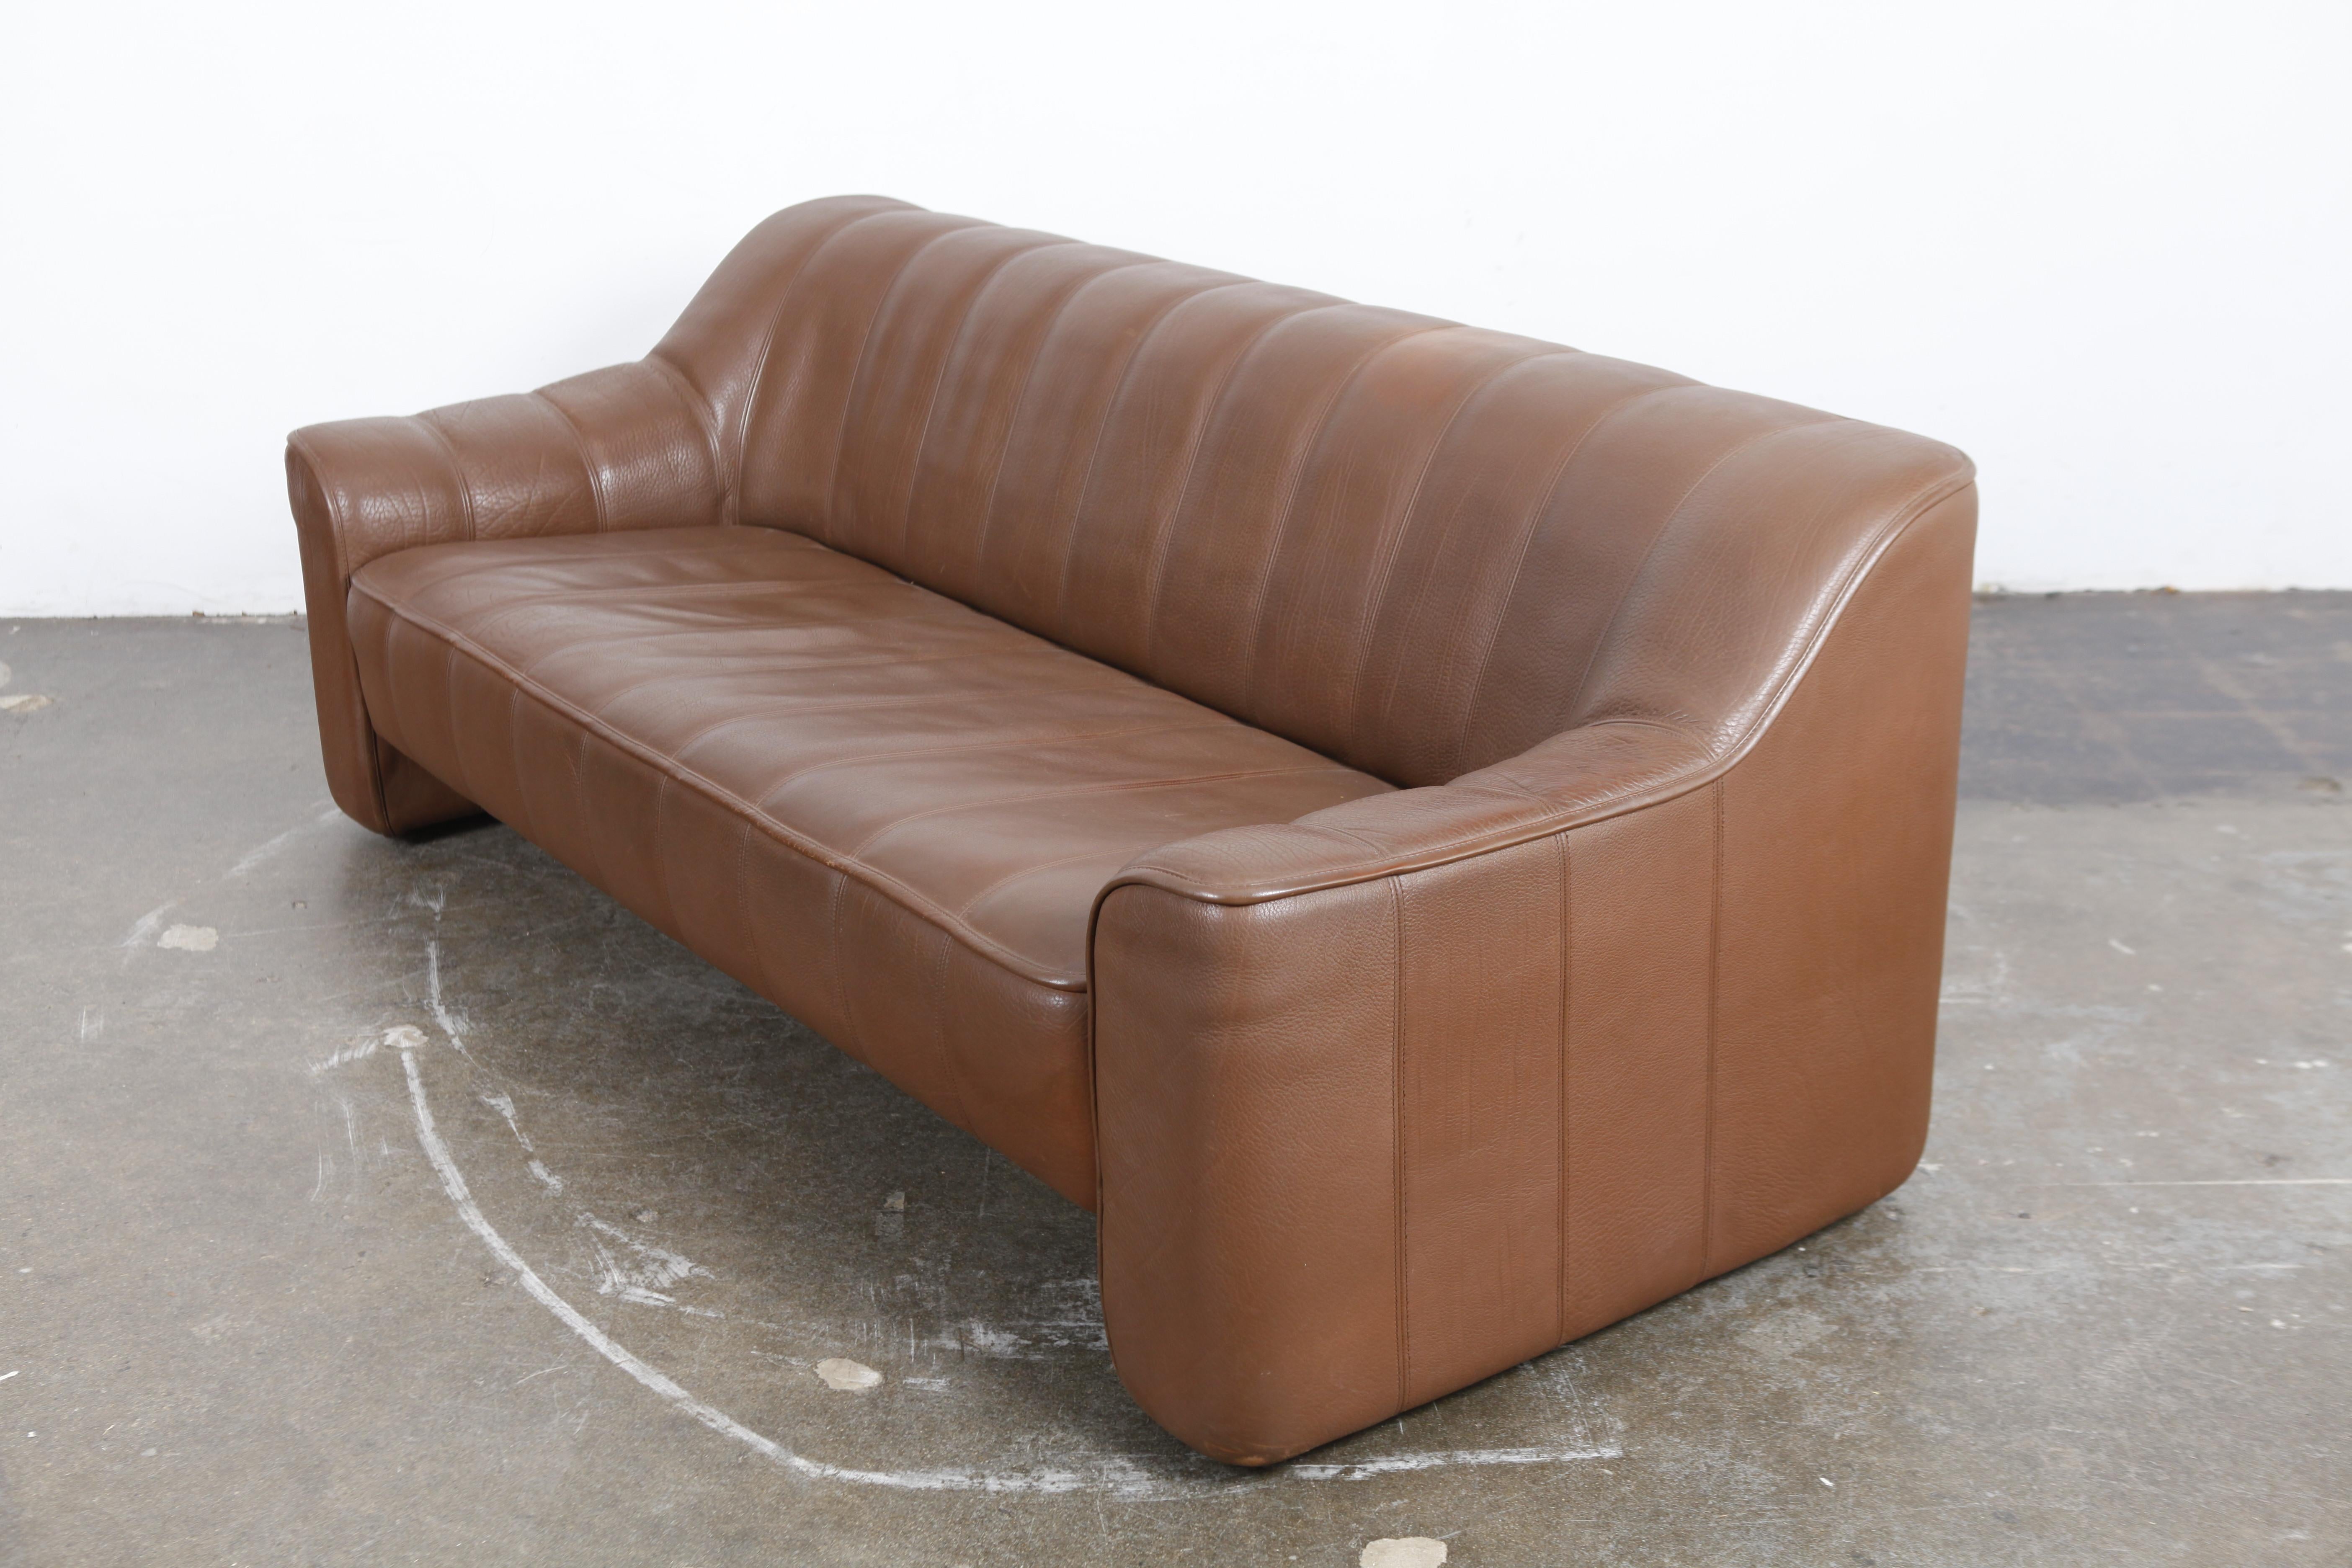 1970s De Sede Leather 3-Seat Sofa 'Model DS 44' from Switzerland For Sale 1